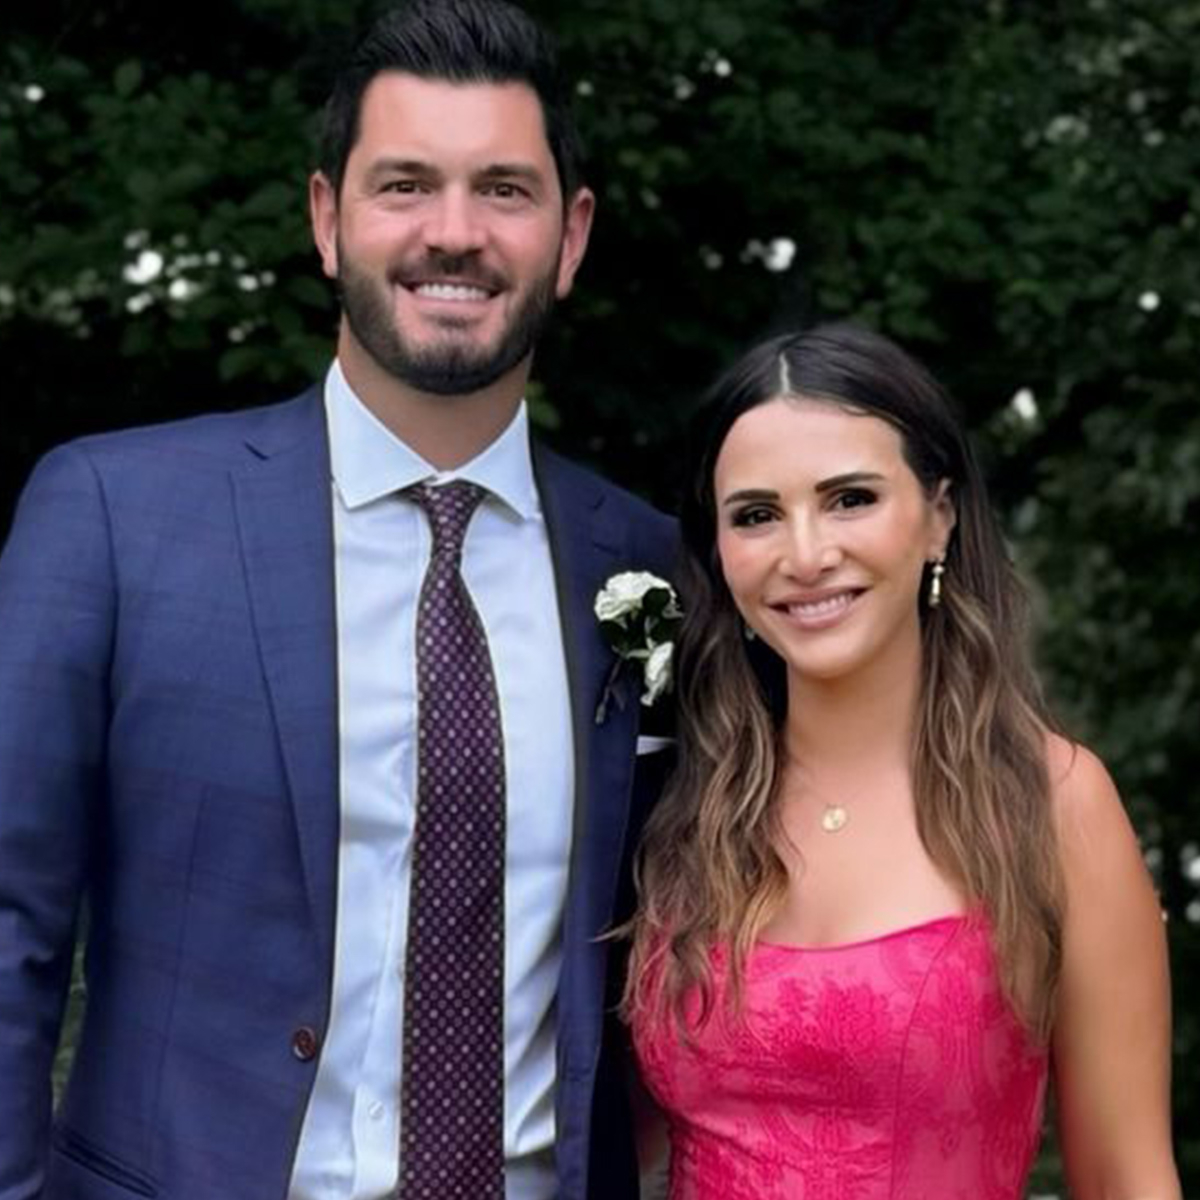 The Bachelorette’s Andi Dorfman Is Pregnant, Expecting First Baby